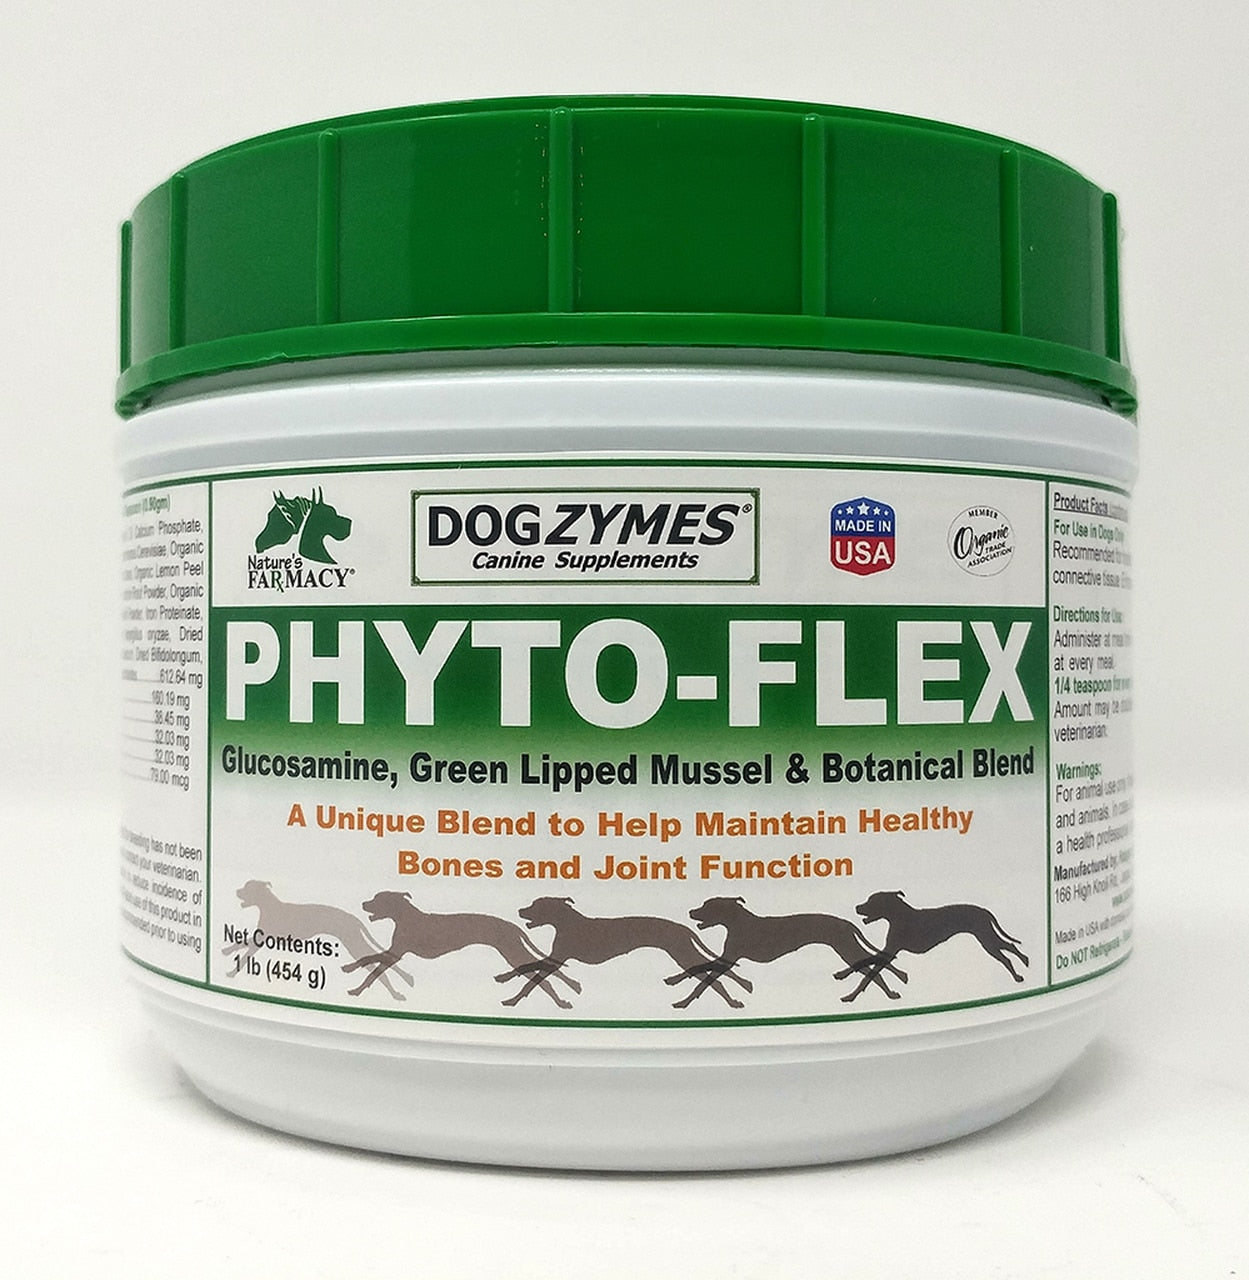 Nature's Farmacy Dogzymes Phyto Flex Supplement For Dogs